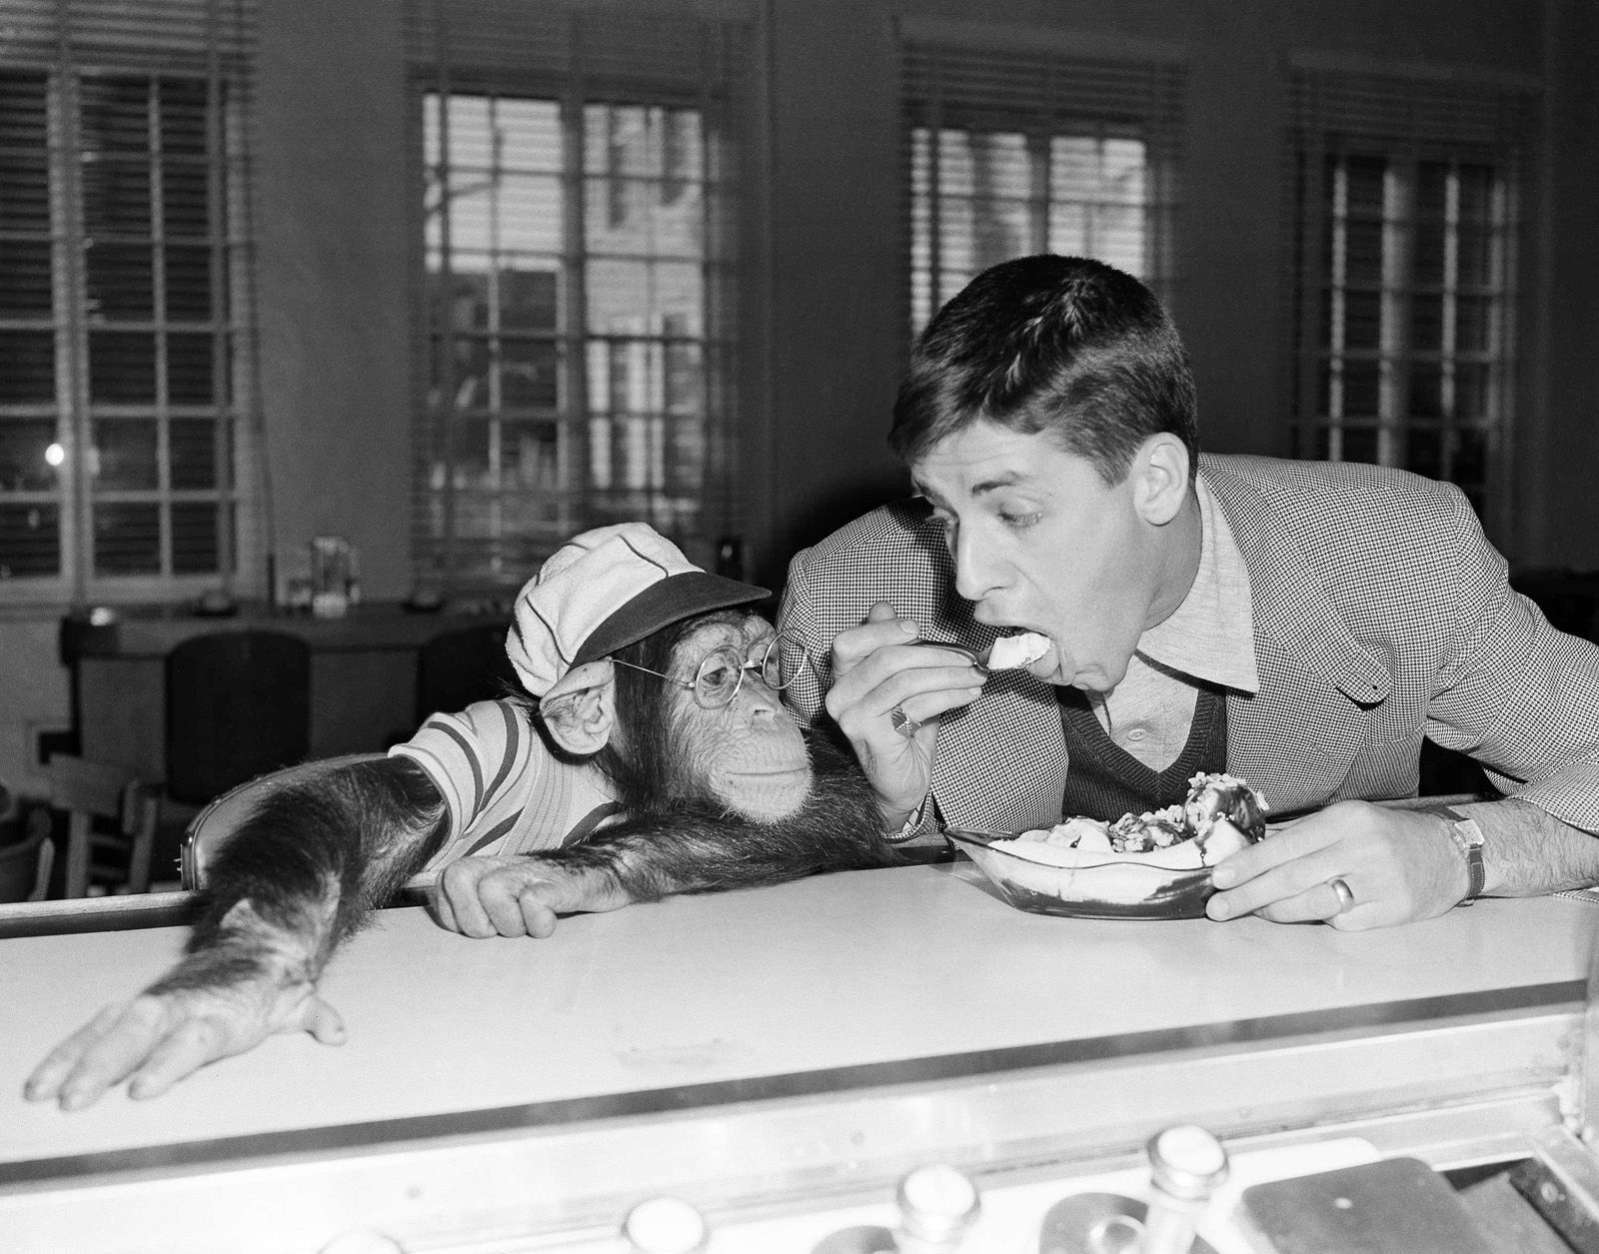 Pierre, a bespectacled five-year-old chimpanzee who's trying to make a name for himself in the movies, is introduced to the banana split by comedian Jerry Lewis, a fellow actor in Hollywood, on Jan. 24, 1950 in Los Angeles.  Pierre is at first,  only mildly interested as Lewis takes a spoonful of banana and strawberry.   Then Pierre decide it's worth a closer look and he takes a taste, with a bit of urging from Lewis.  Later Pierre gobbled a whole one. (AP Photo/Frank Filan)